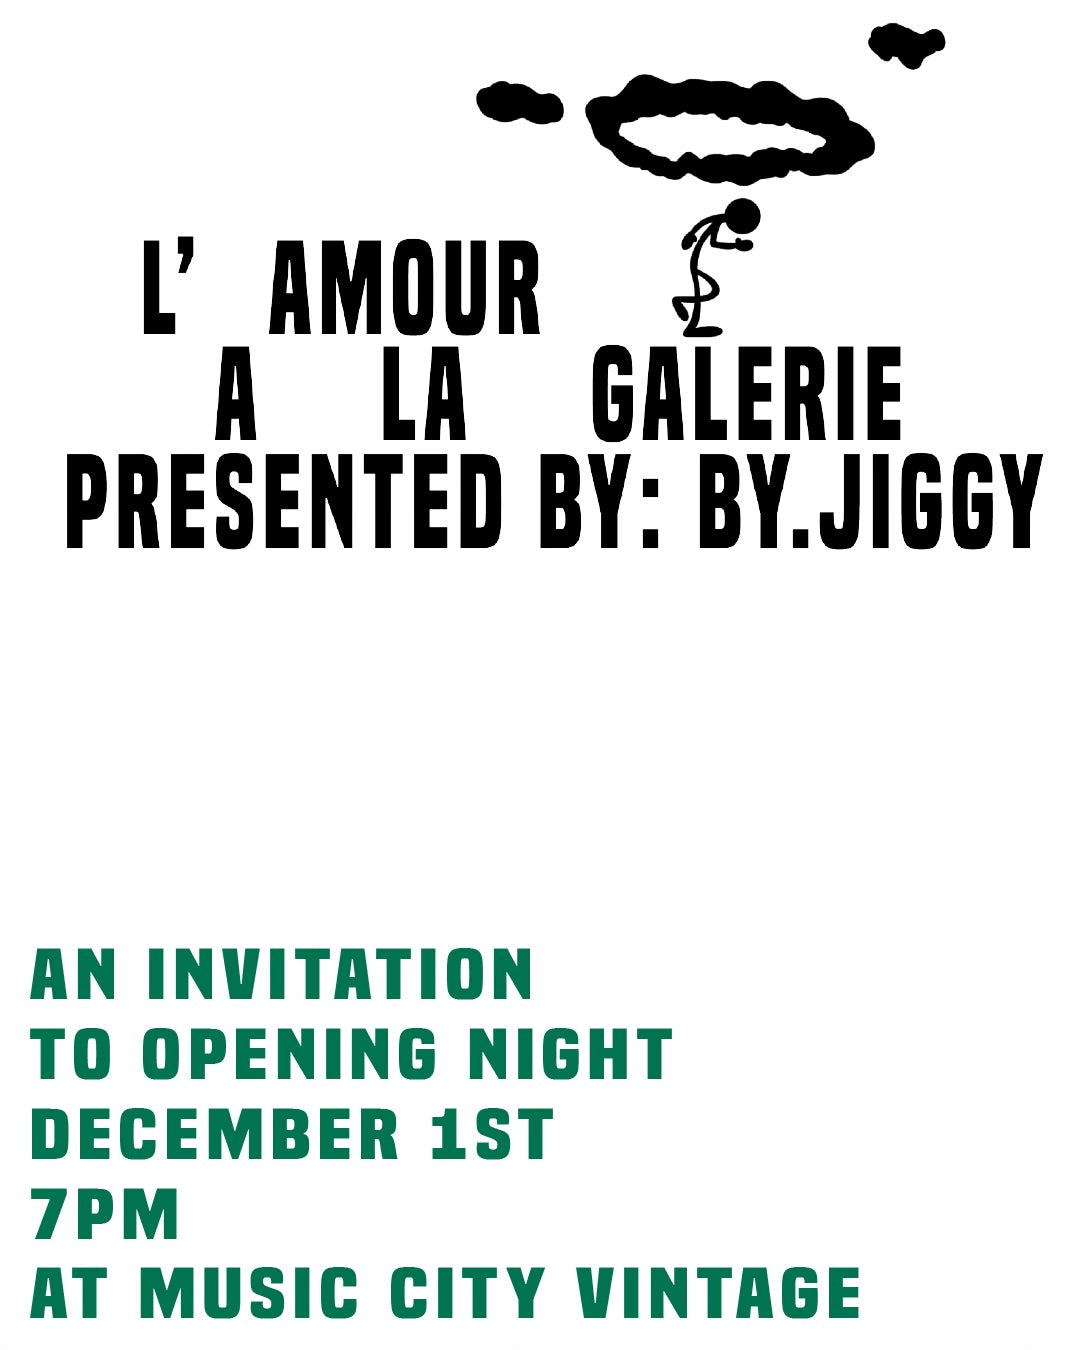 L'AMOUR A LA GALERIE PRESENTED BY: BY.JIGGY